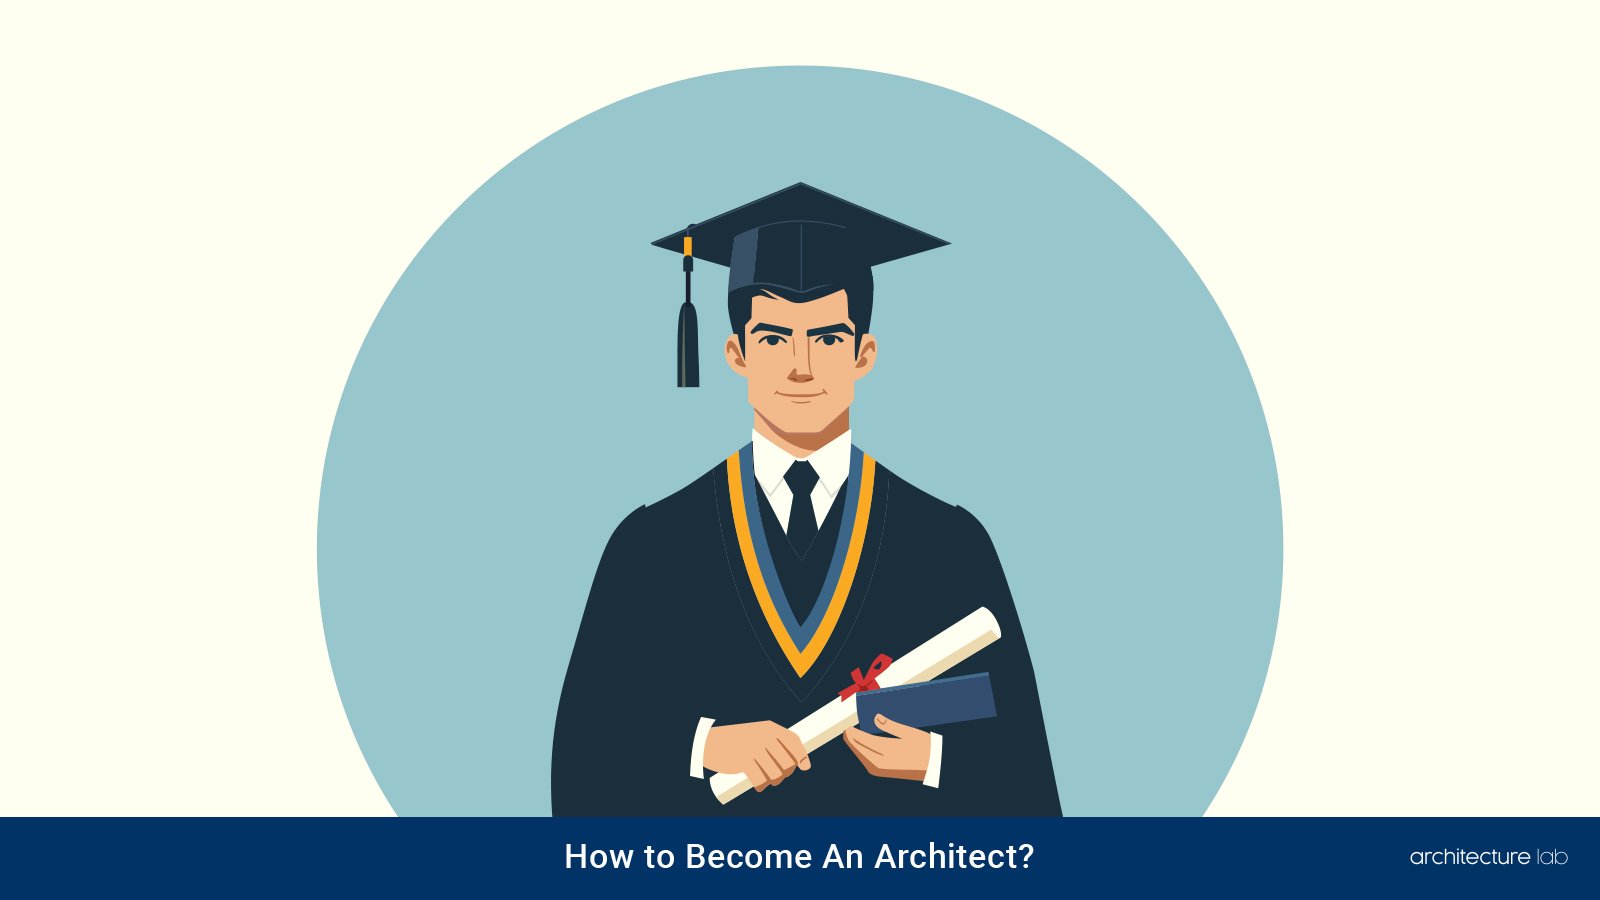 Architect: studies, work, and how to become an architect?